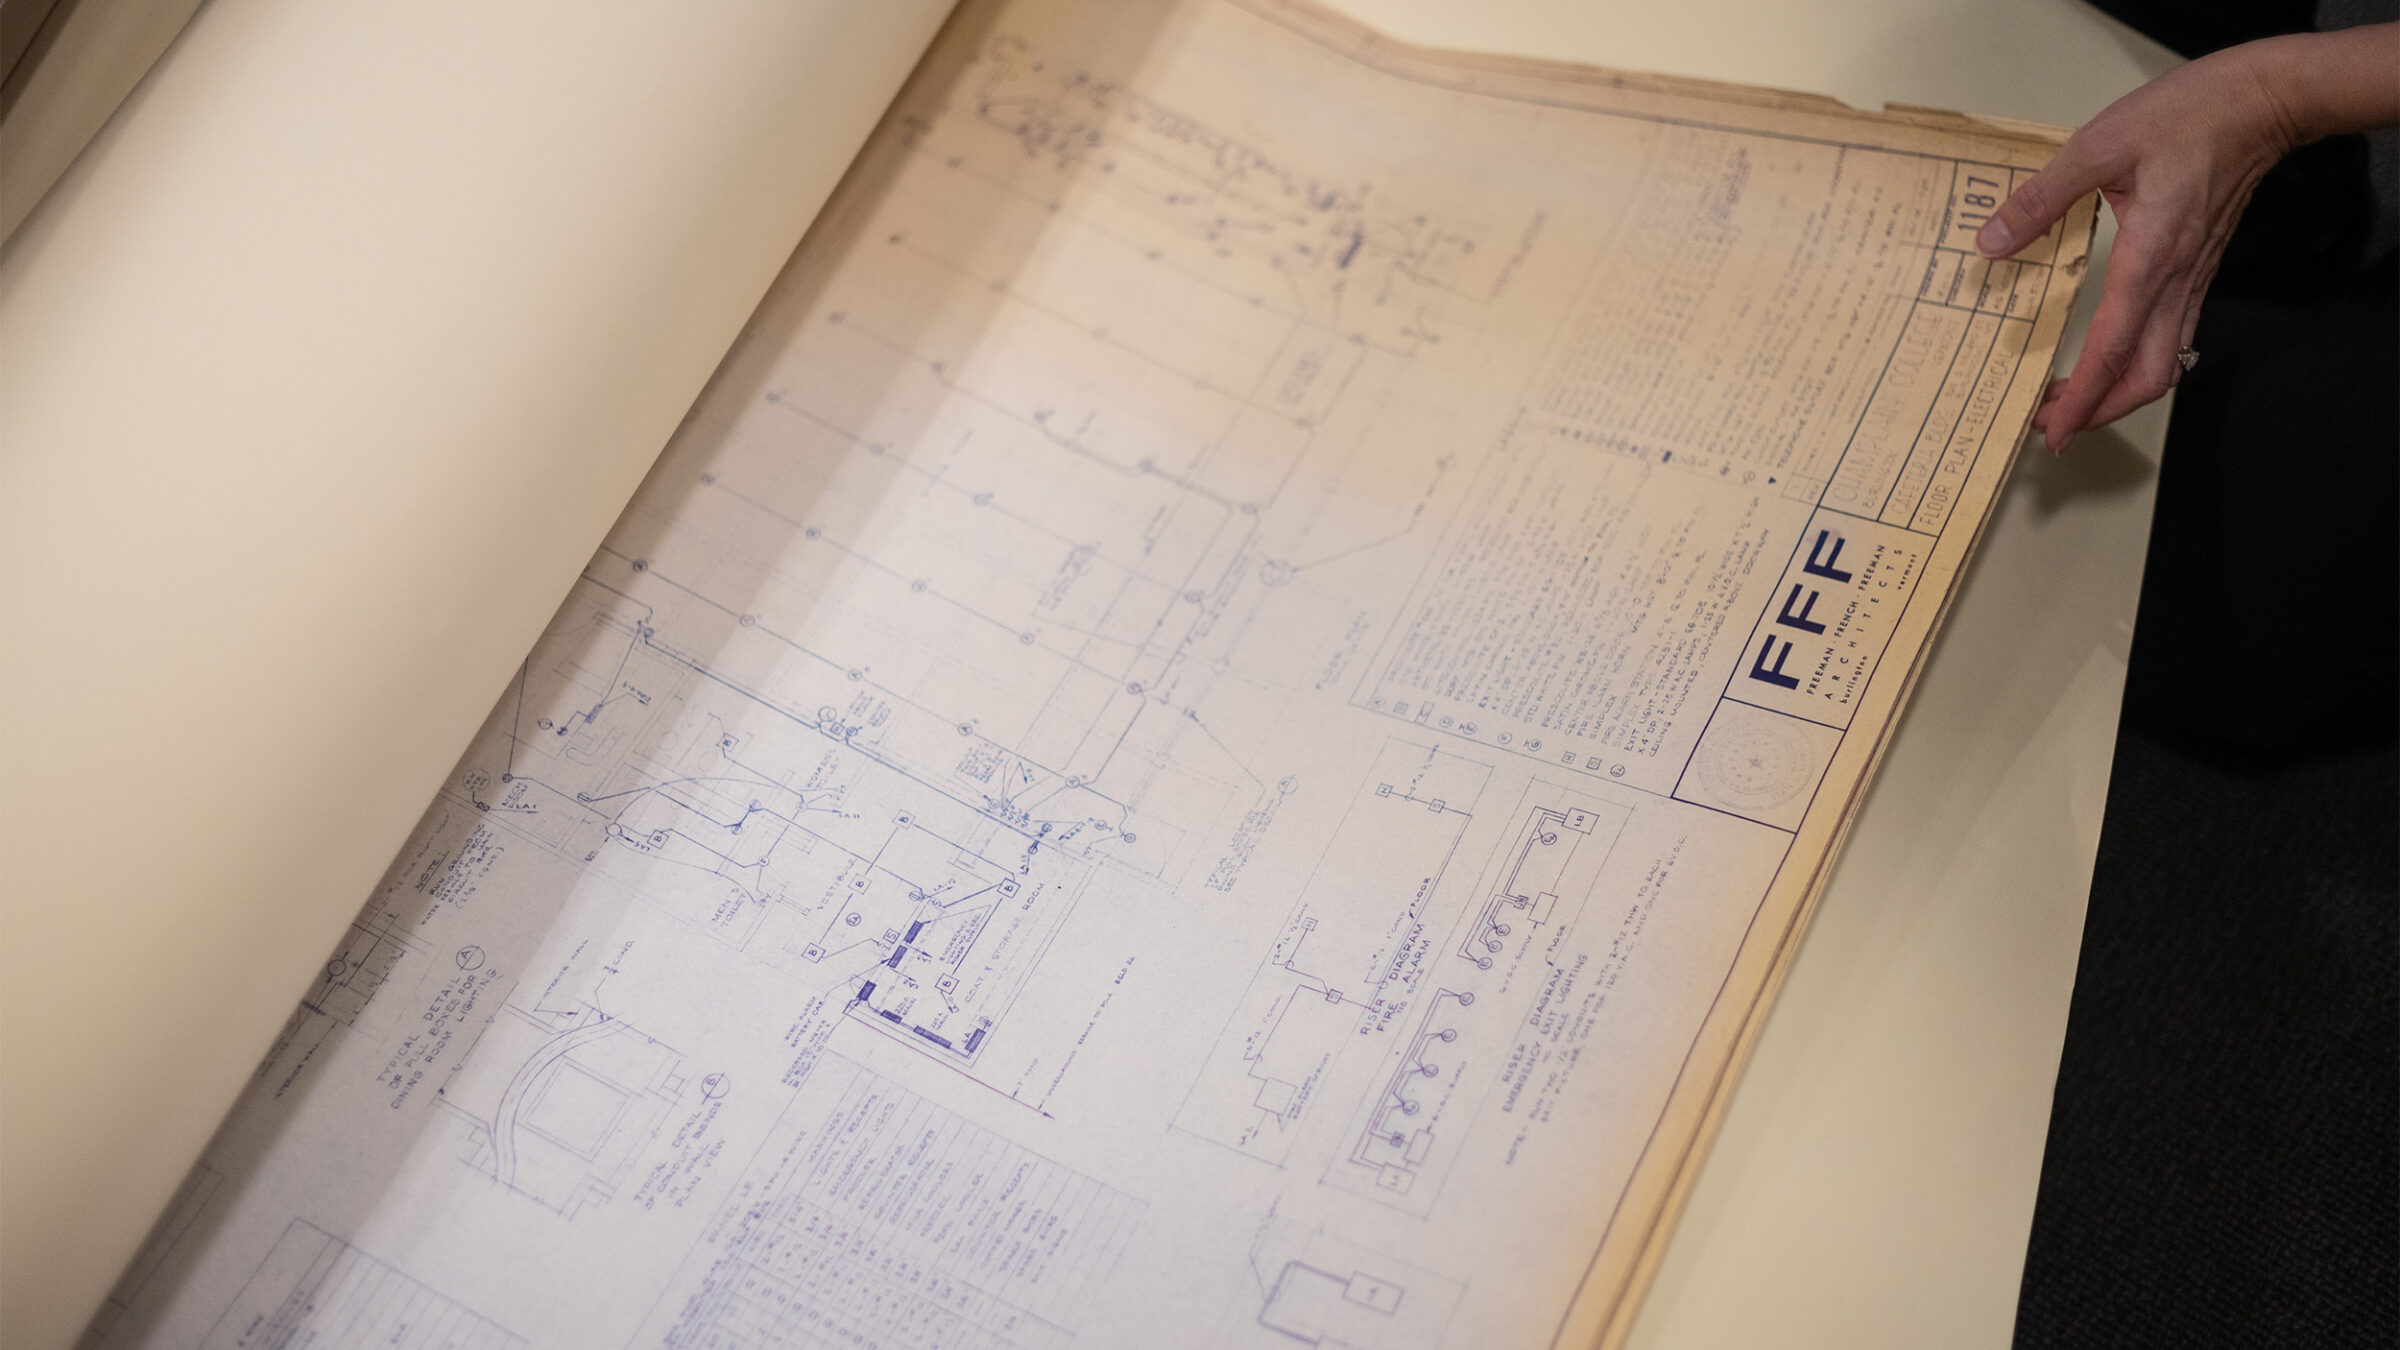 A draft blueprint of a Champlain College building, labeled cafeteria building